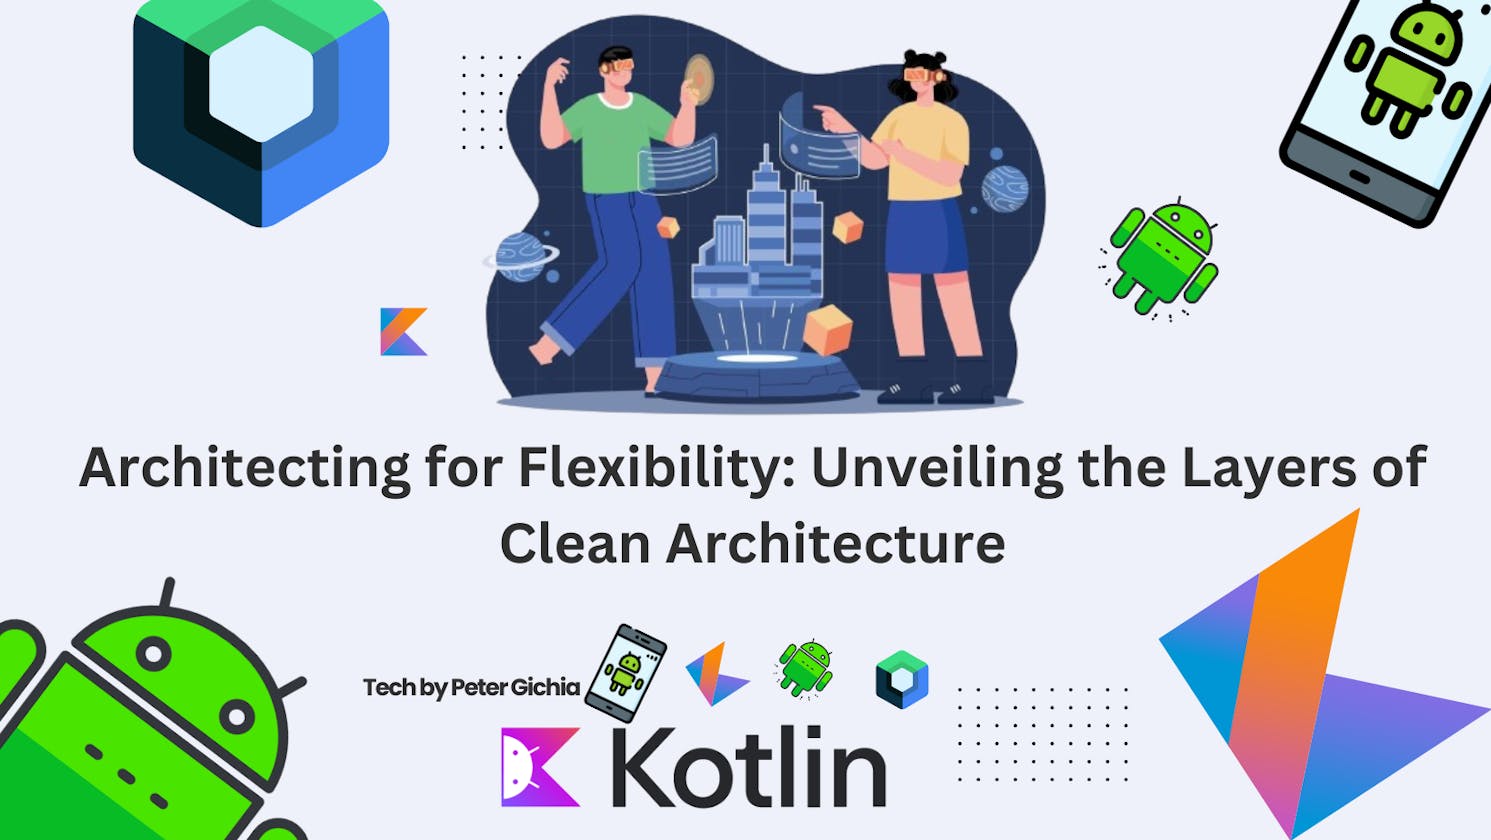 Architecting for Flexibility: Unveiling the Layers of Clean Architecture - Part 2